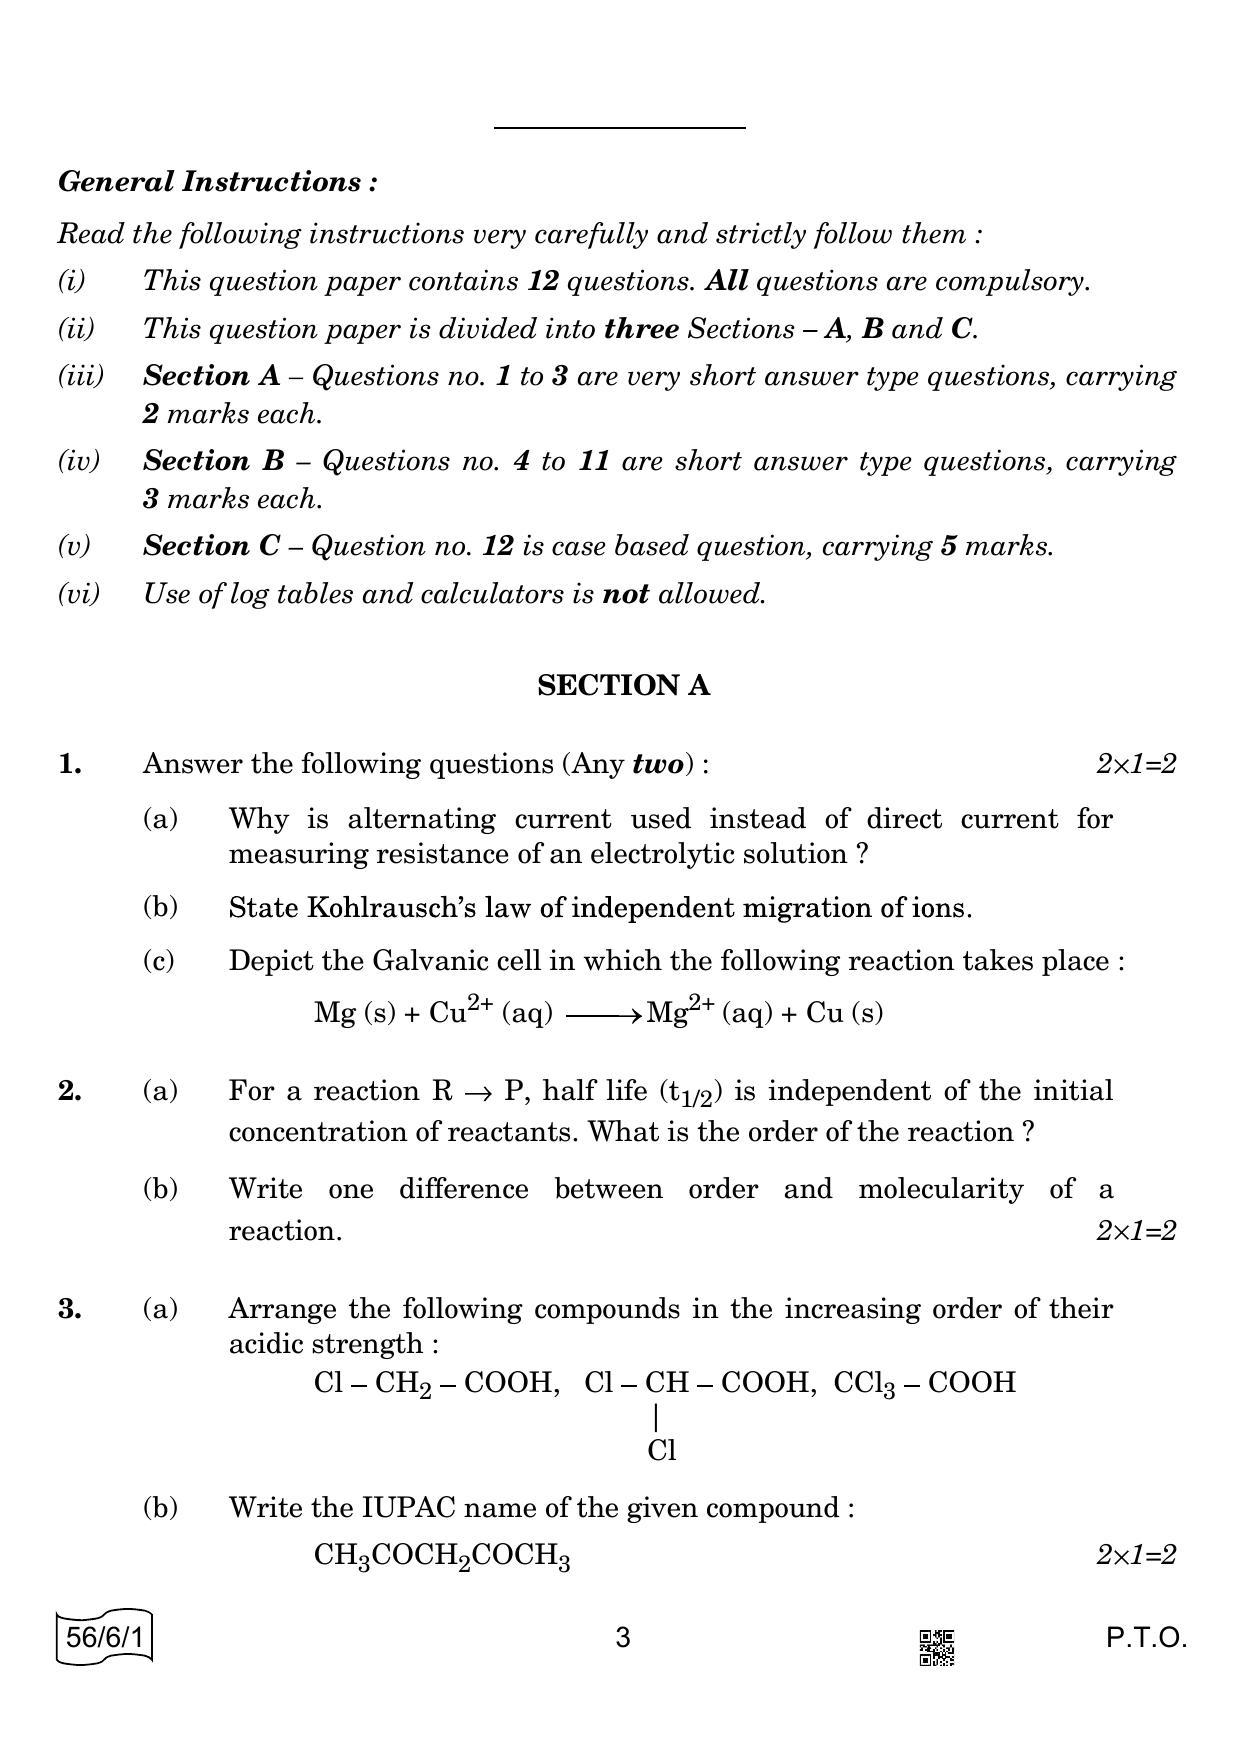 CBSE Class 12 56-6-1 CHEMISTRY 2022 Compartment Question Paper - Page 3